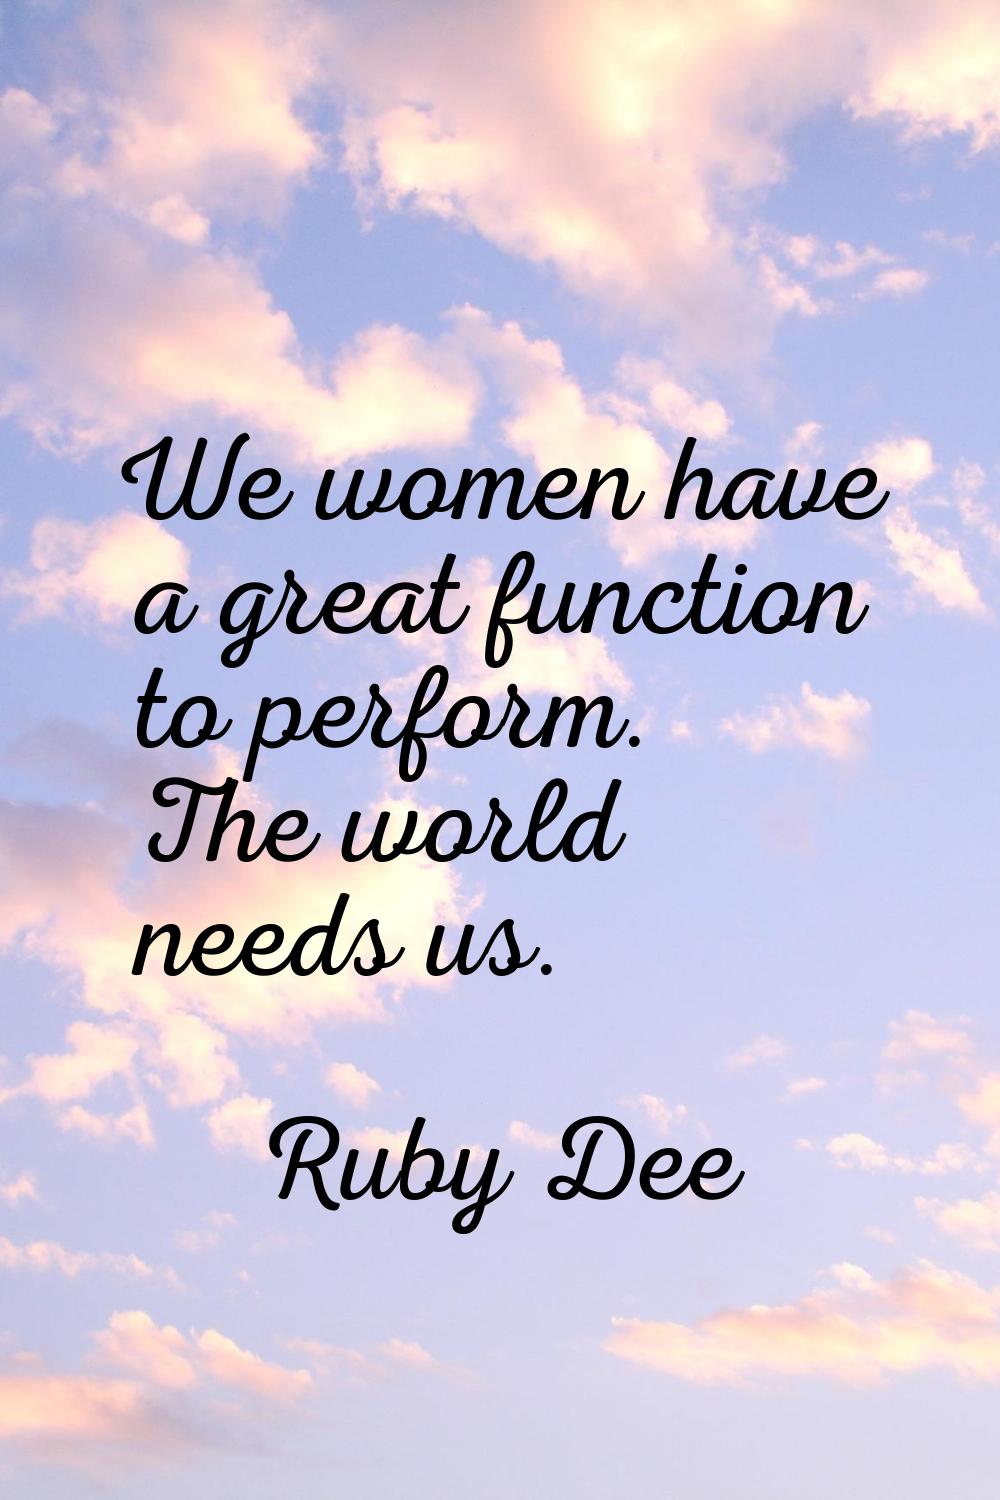 We women have a great function to perform. The world needs us.